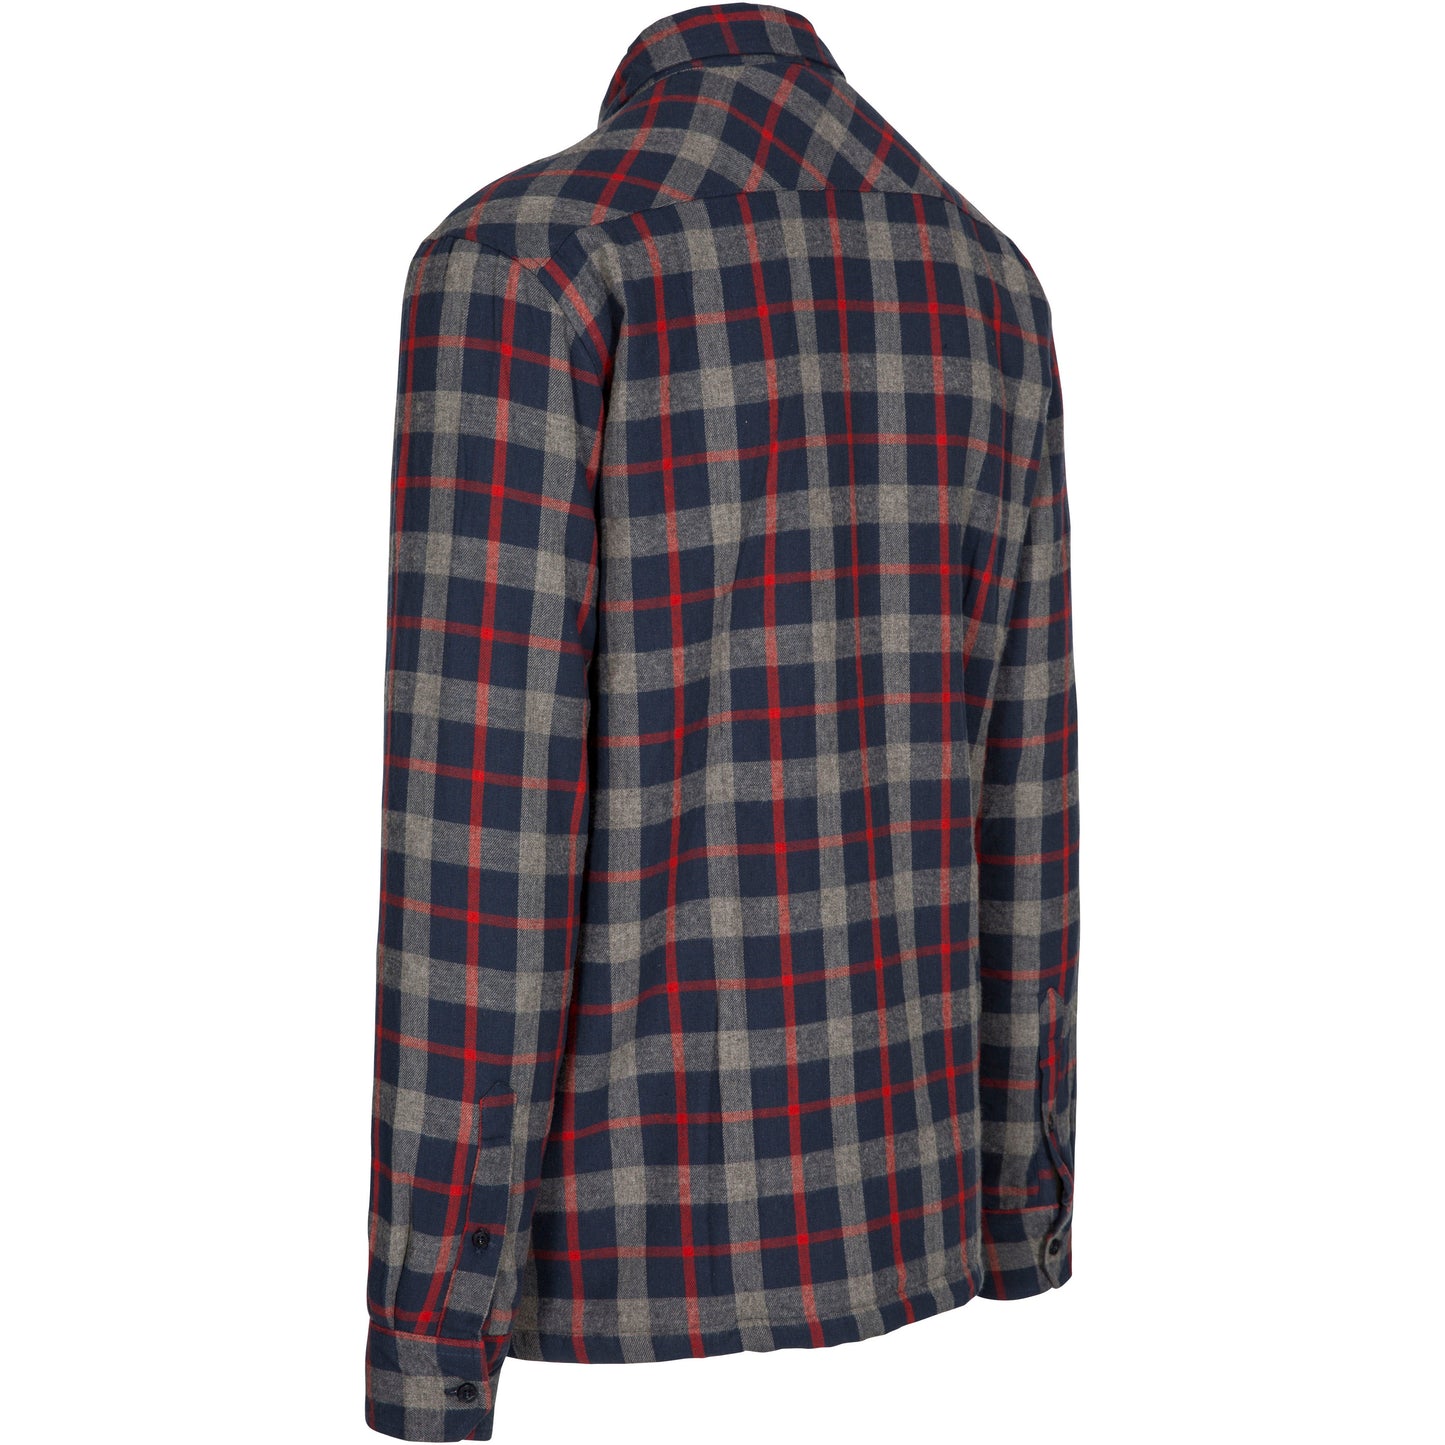 Rapeseed Men's Check Shirt with Sherpa Lining in Navy Check